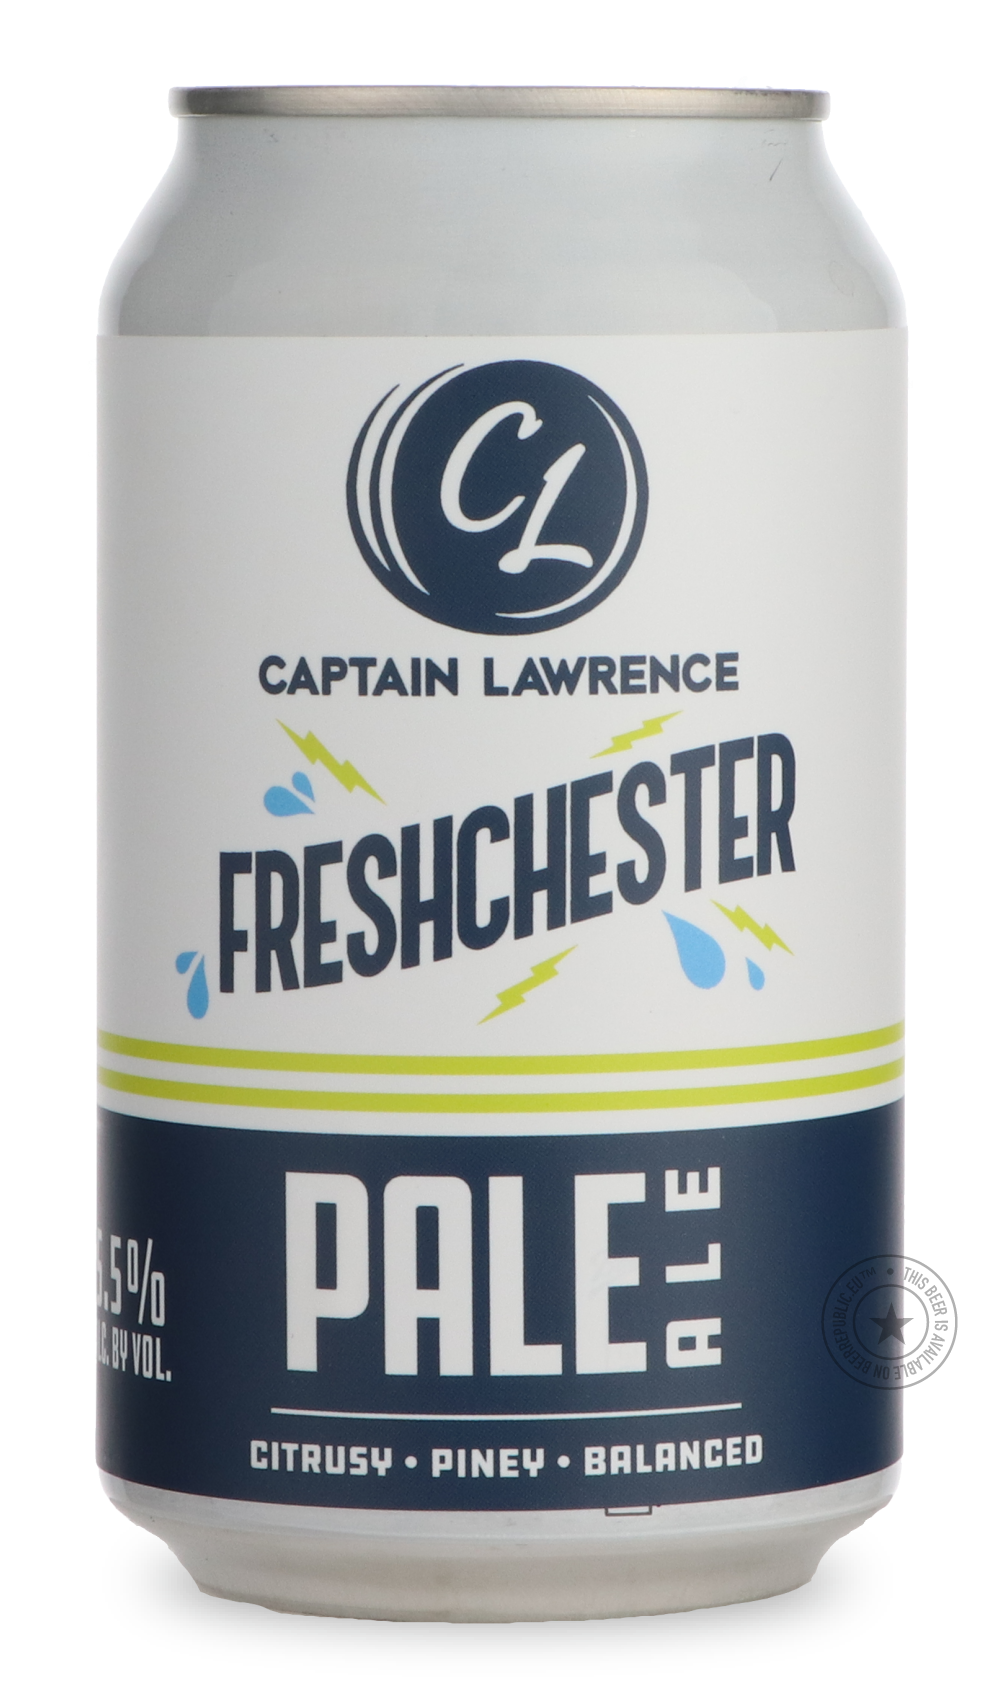 -Captain Lawrence- Freshchester-Pale- Only @ Beer Republic - The best online beer store for American & Canadian craft beer - Buy beer online from the USA and Canada - Bier online kopen - Amerikaans bier kopen - Craft beer store - Craft beer kopen - Amerikanisch bier kaufen - Bier online kaufen - Acheter biere online - IPA - Stout - Porter - New England IPA - Hazy IPA - Imperial Stout - Barrel Aged - Barrel Aged Imperial Stout - Brown - Dark beer - Blond - Blonde - Pilsner - Lager - Wheat - Weizen - Amber - 